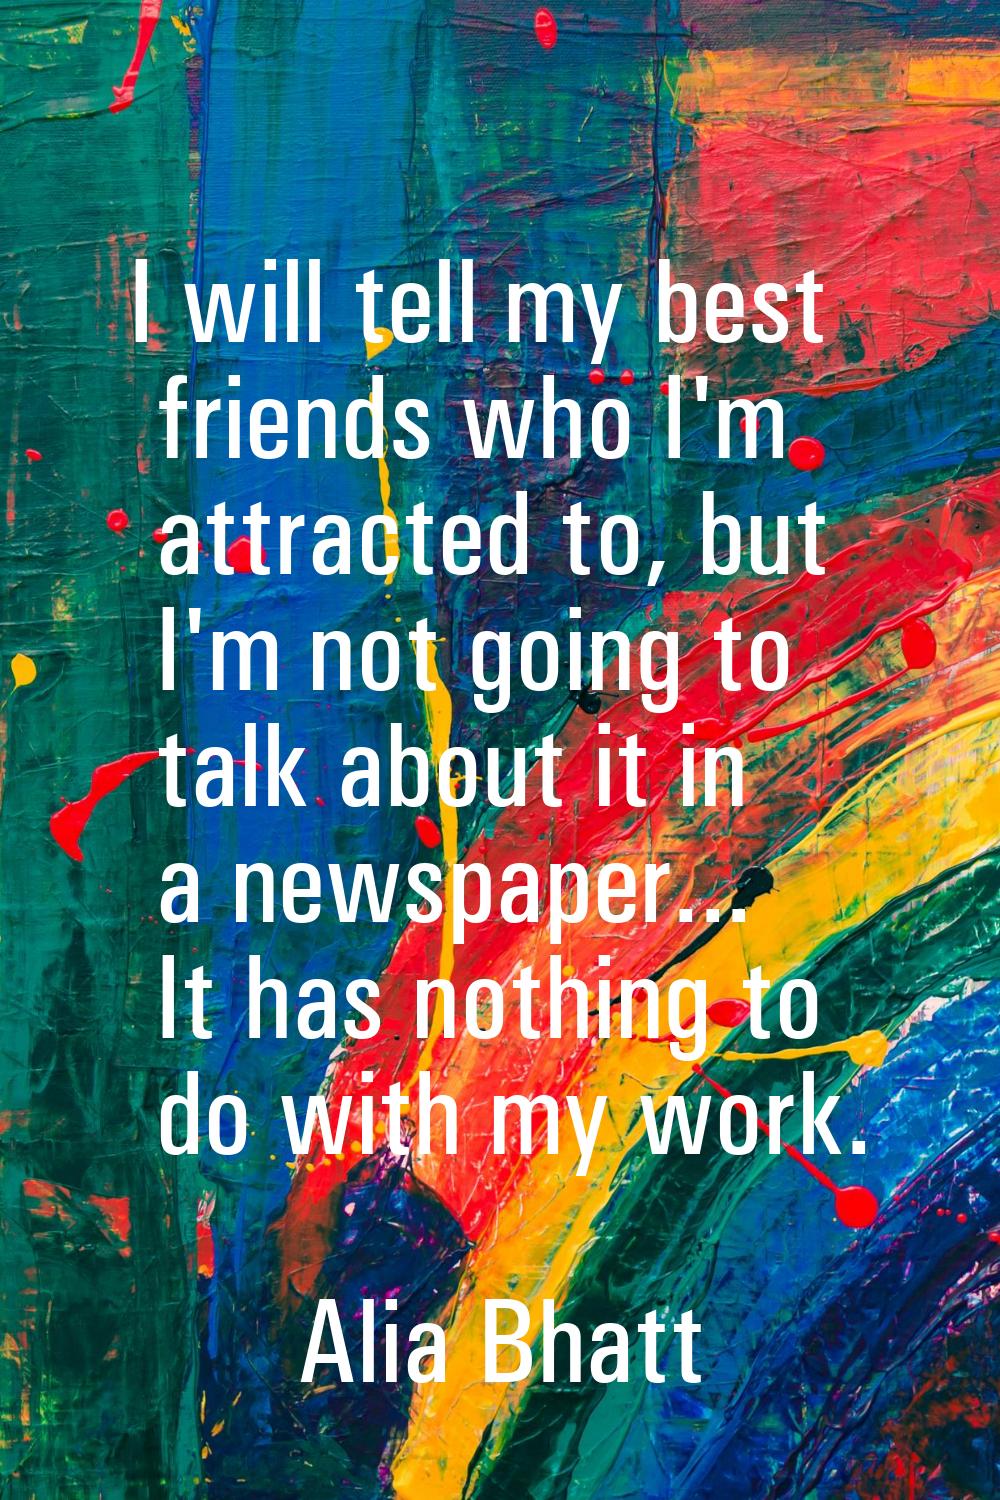 I will tell my best friends who I'm attracted to, but I'm not going to talk about it in a newspaper